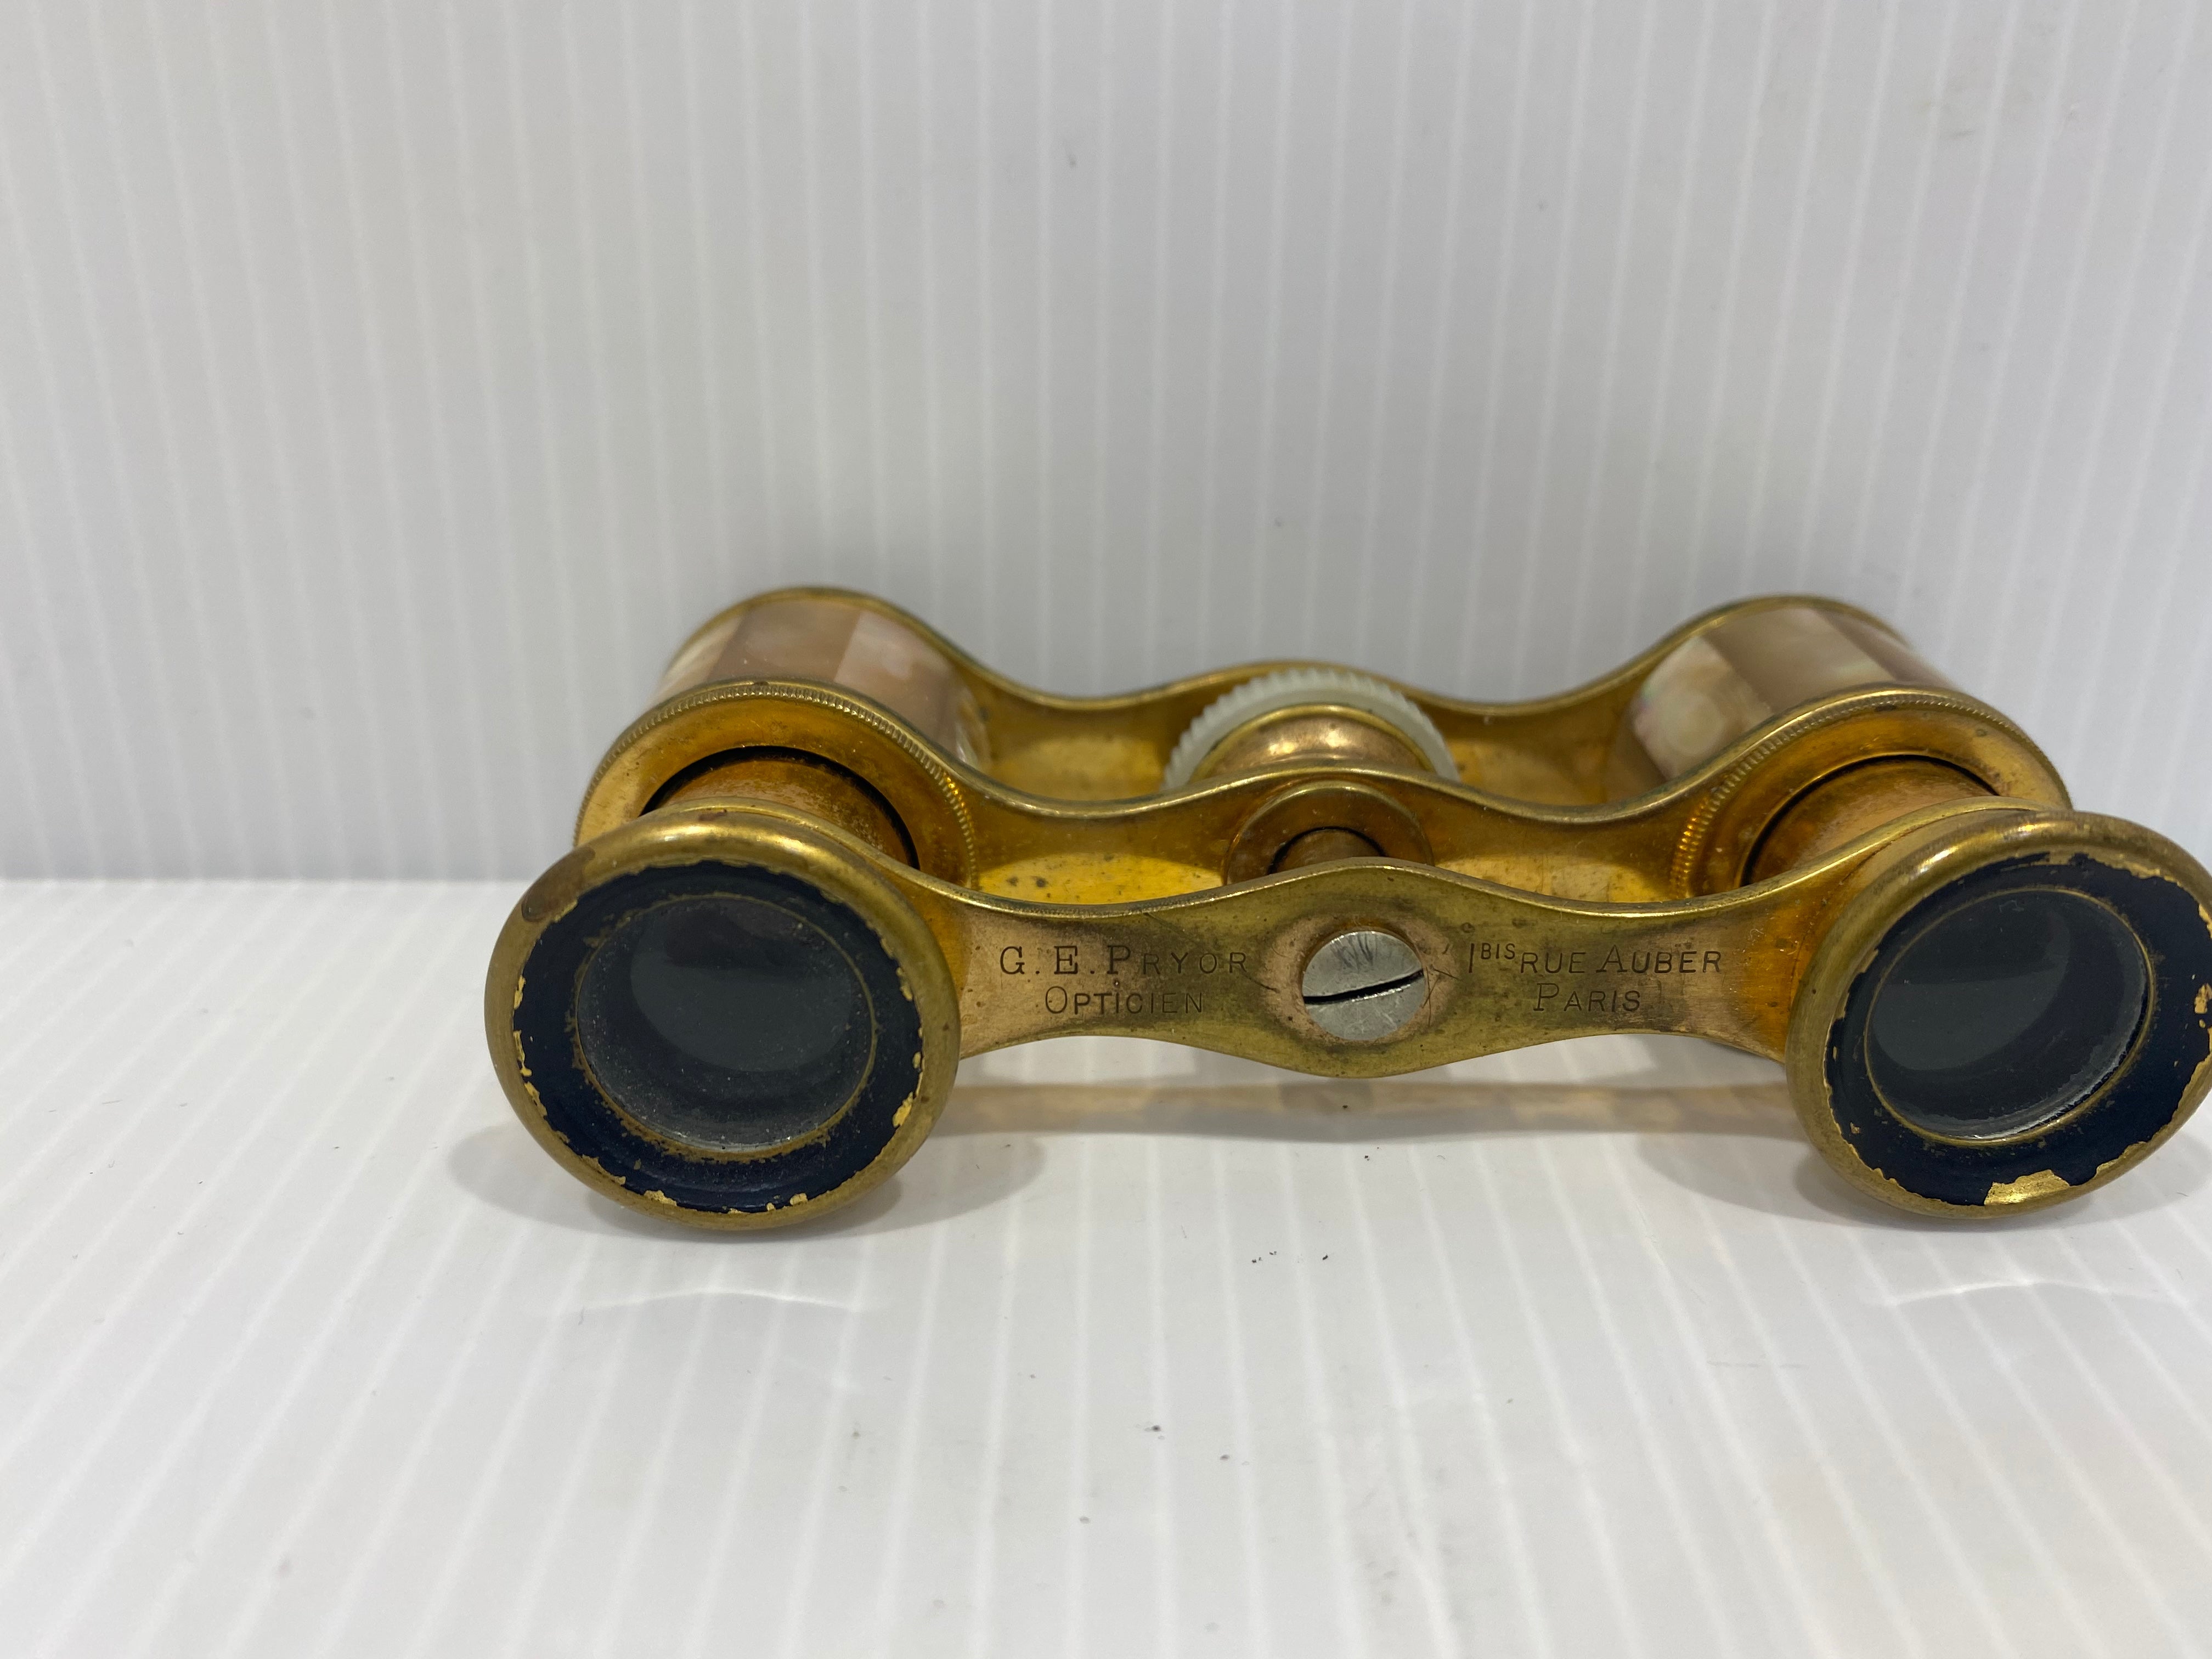 Antique late 1800's to early 1900's. G.E. Pryor Paris Opera glasses